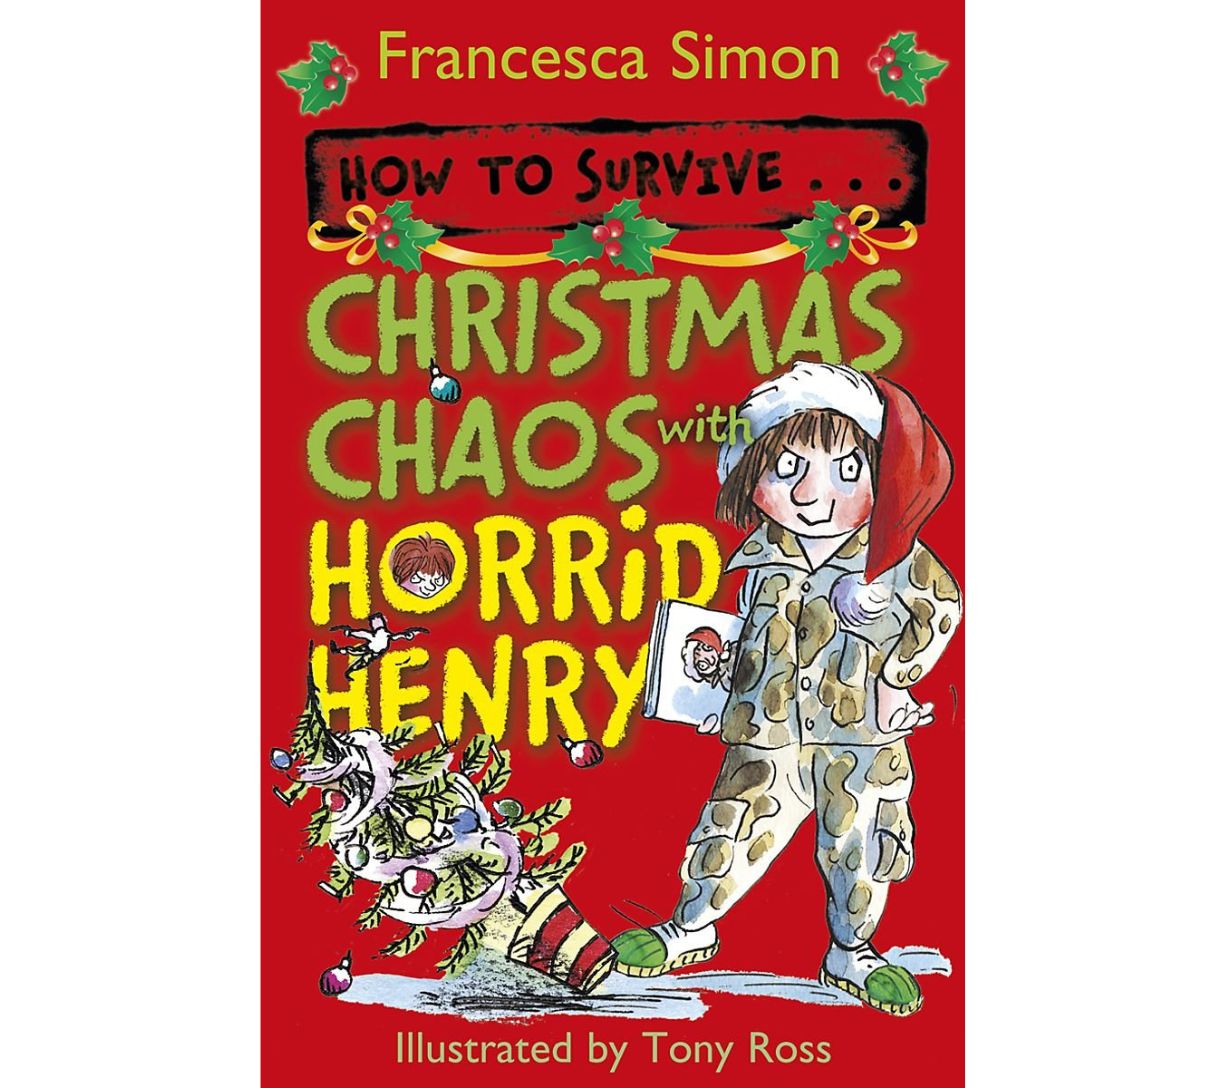 How to Survive . . . Christmas Chaos with Horrid Henry